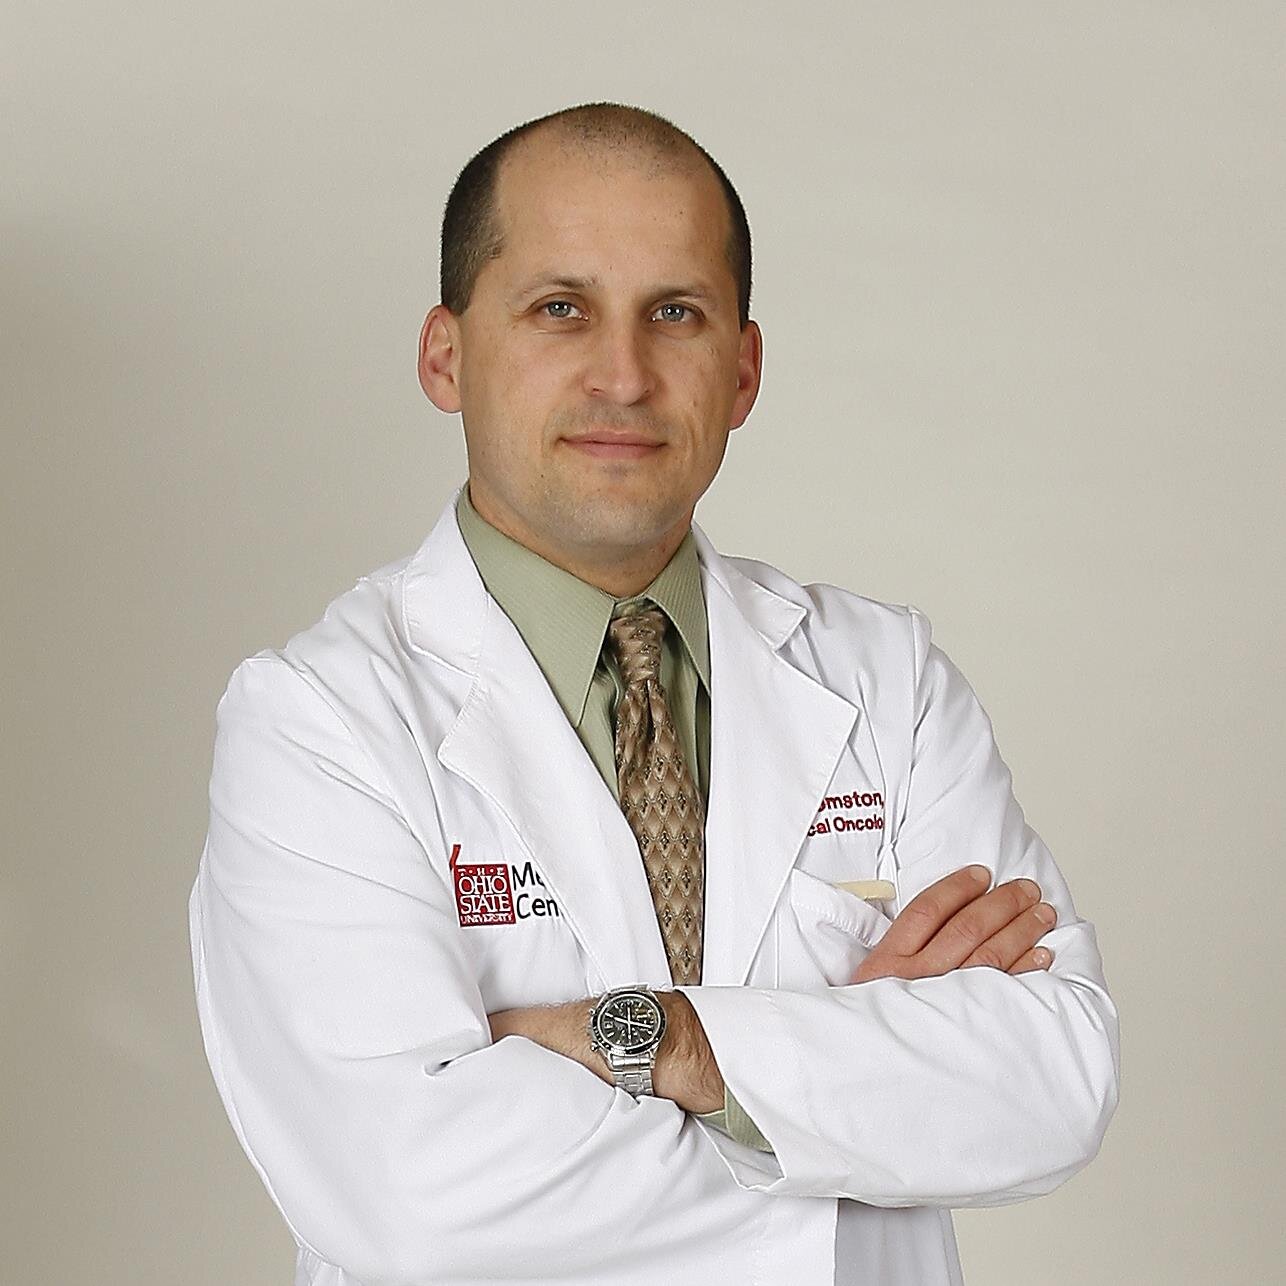 Surgical Oncologist specializing in Hepatobiliary, Pancreatic, and advanced GI cancers; South Florida Surgical Oncology